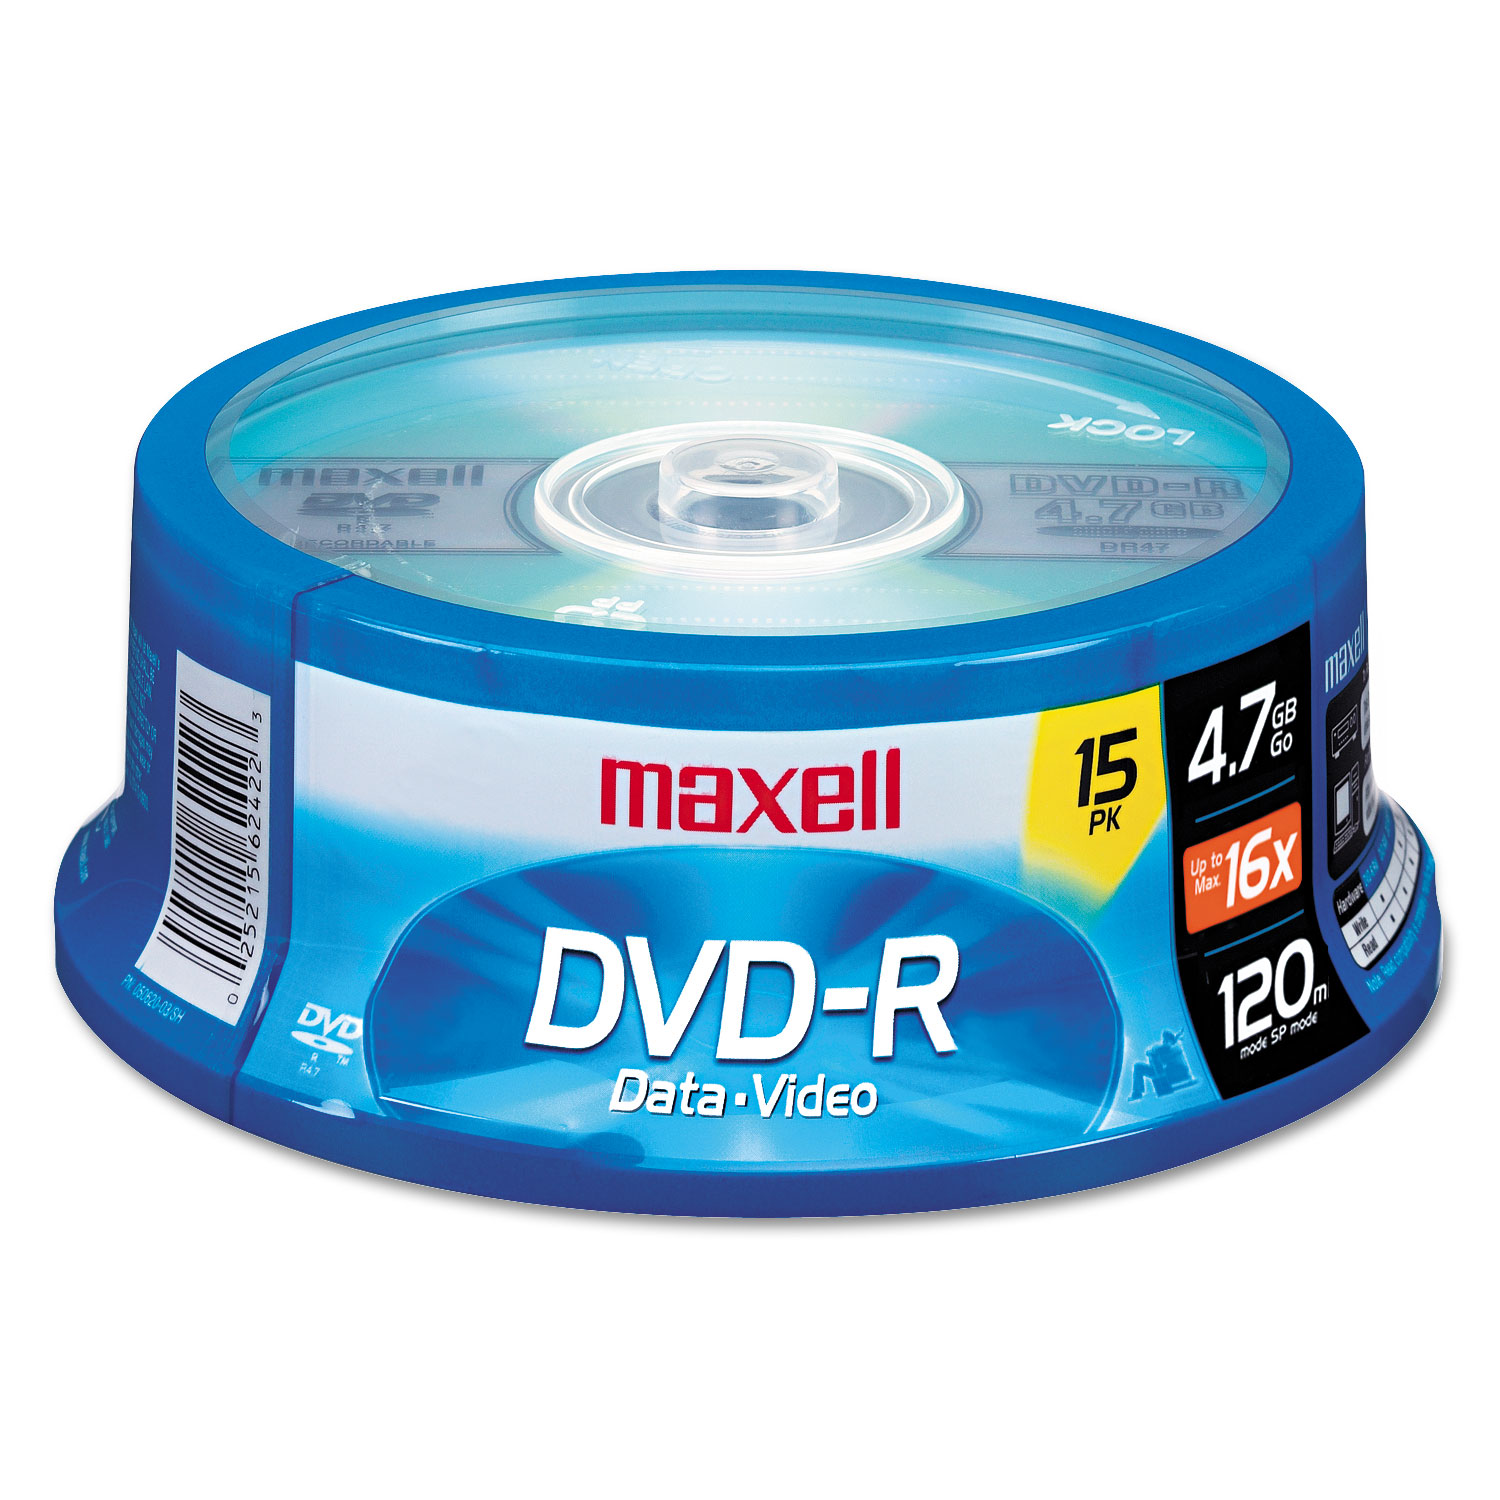 DVD-R Discs, 4.7GB, 16x, Spindle, Gold, 15/Pack